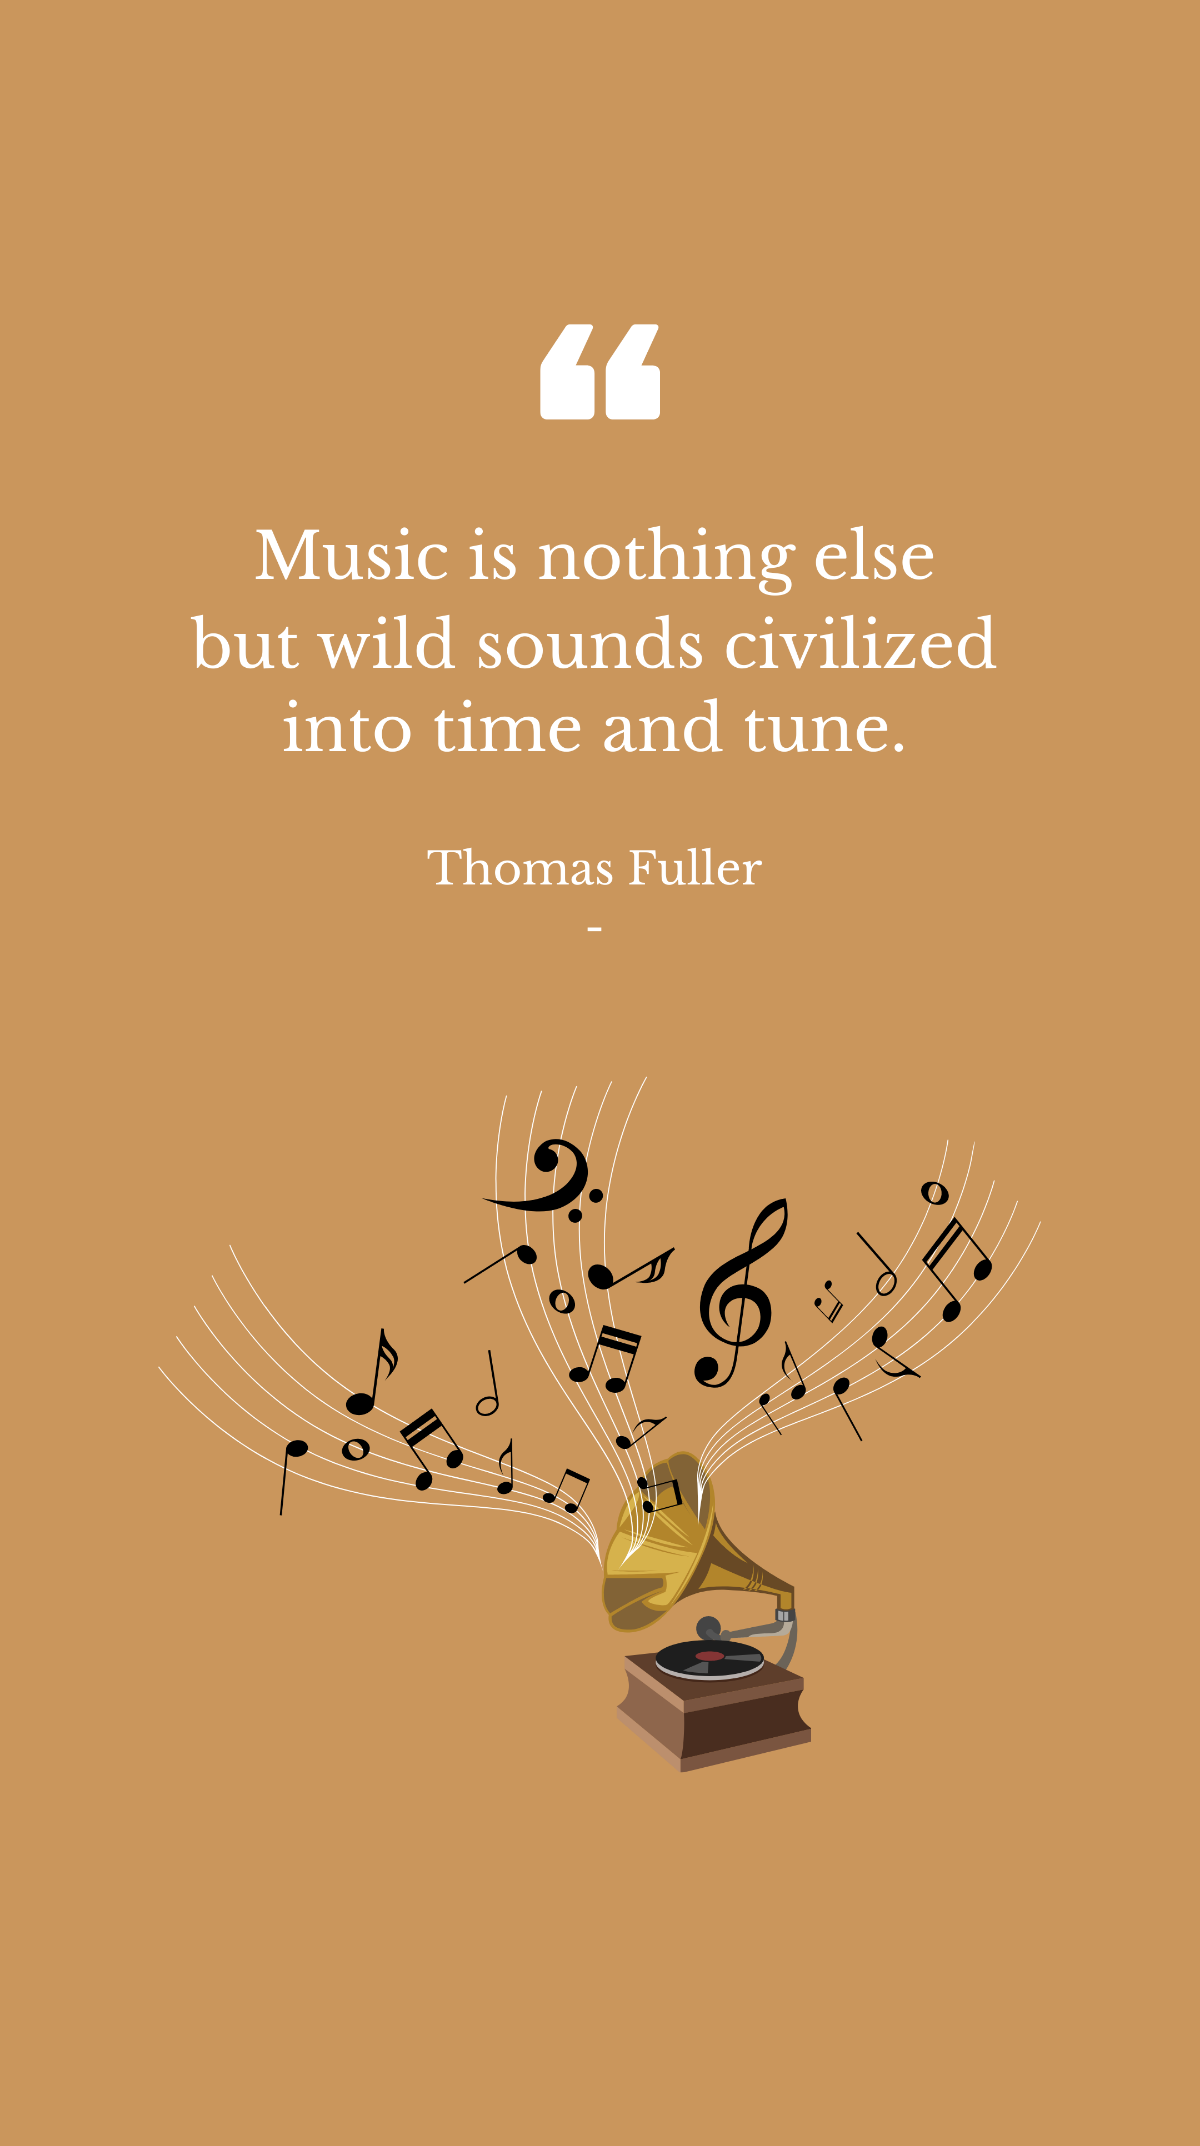 Thomas Fuller - Music is nothing else but wild sounds civilized into time and tune.